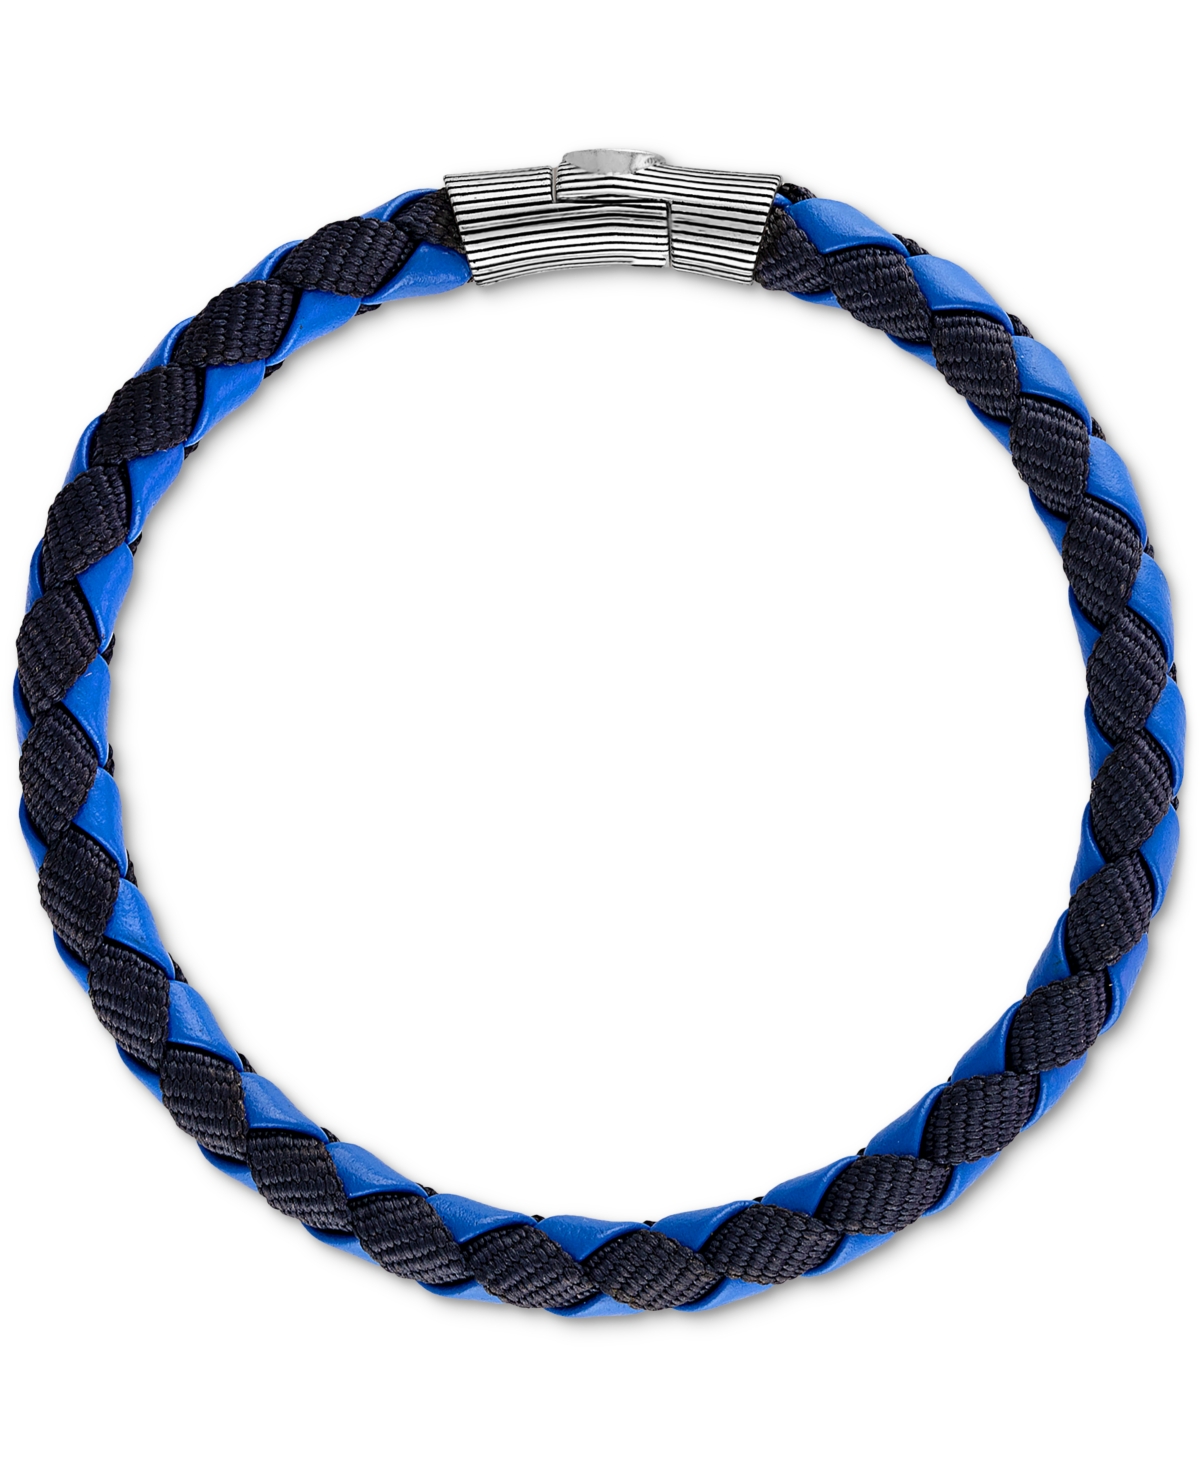 Blue Leather Woven Bracelet in Sterling Silver, Created for Macy's - Blue